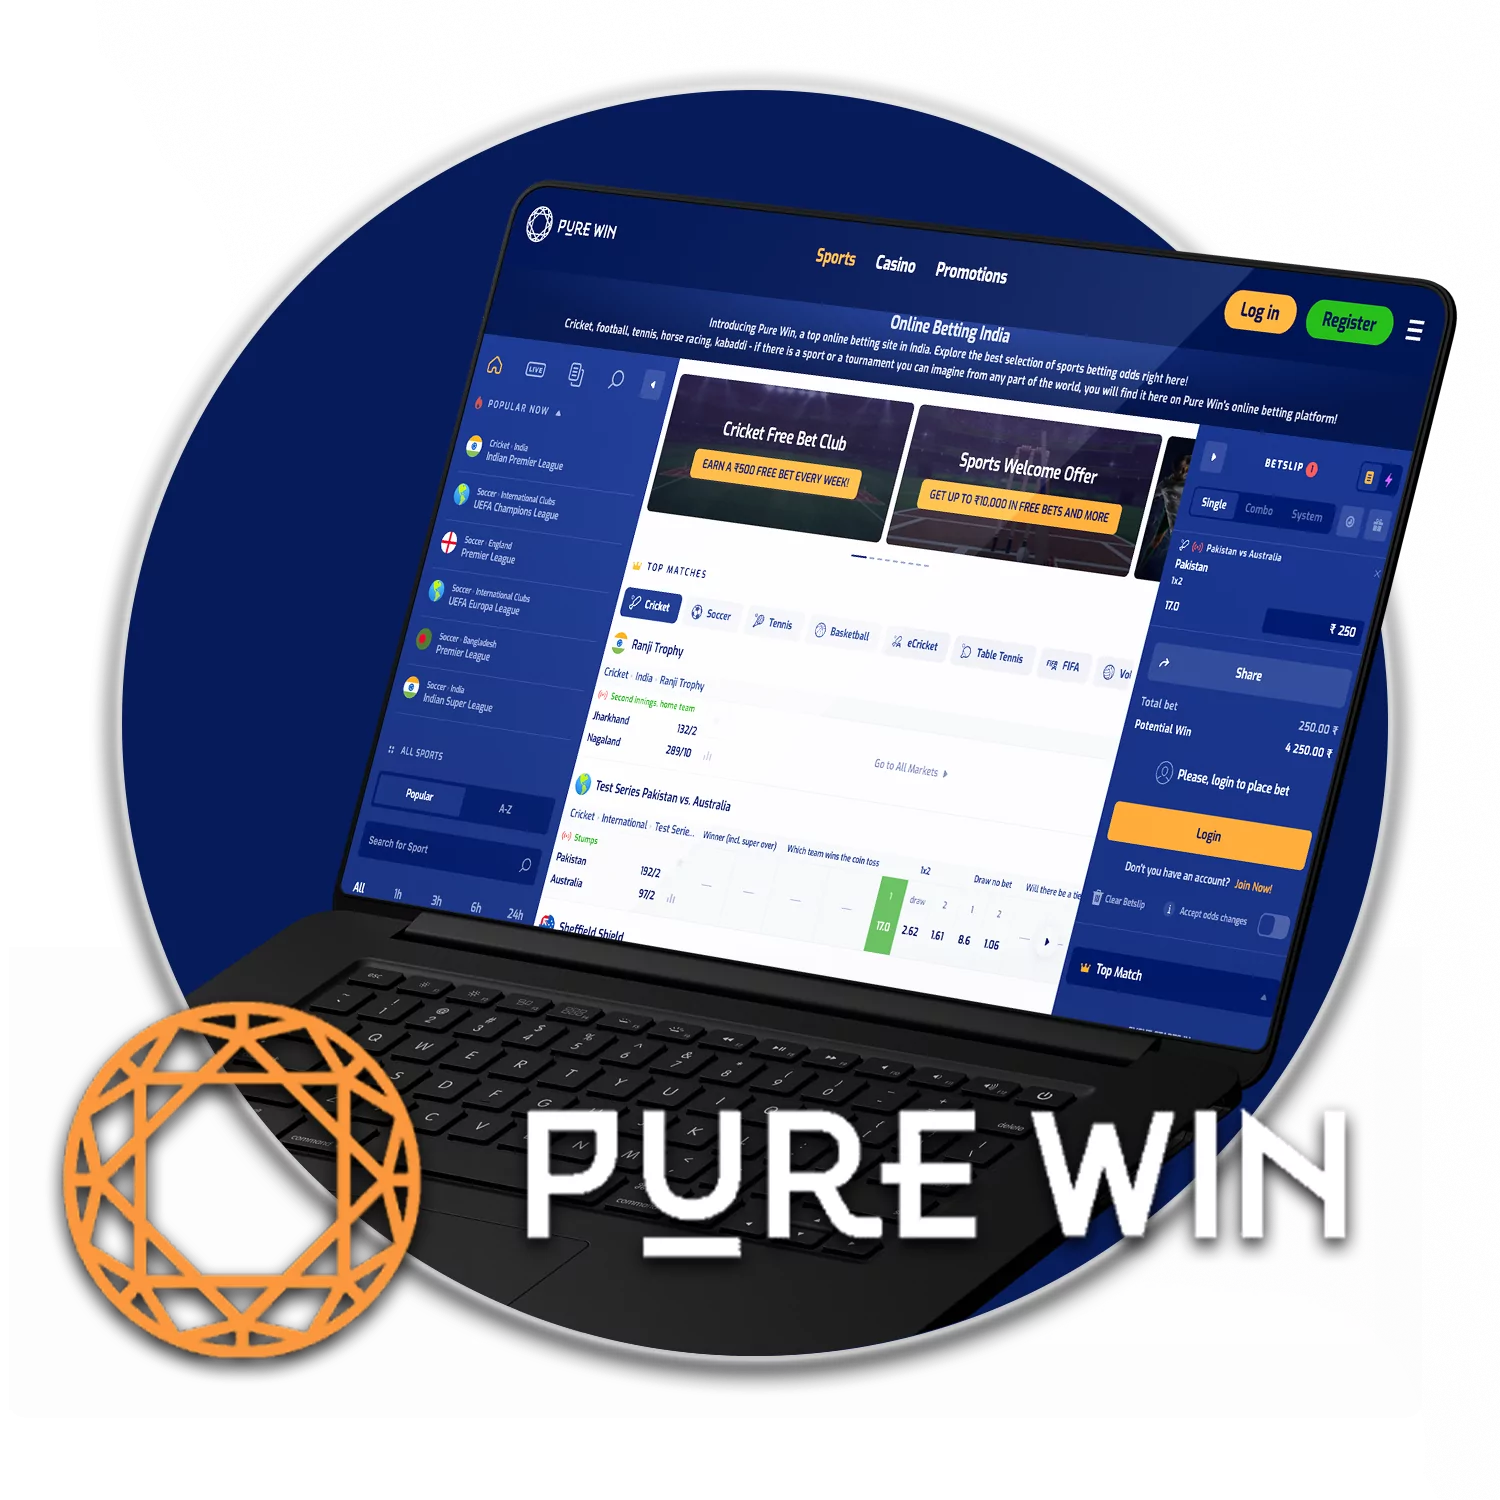 Place your bets at Pure Win.